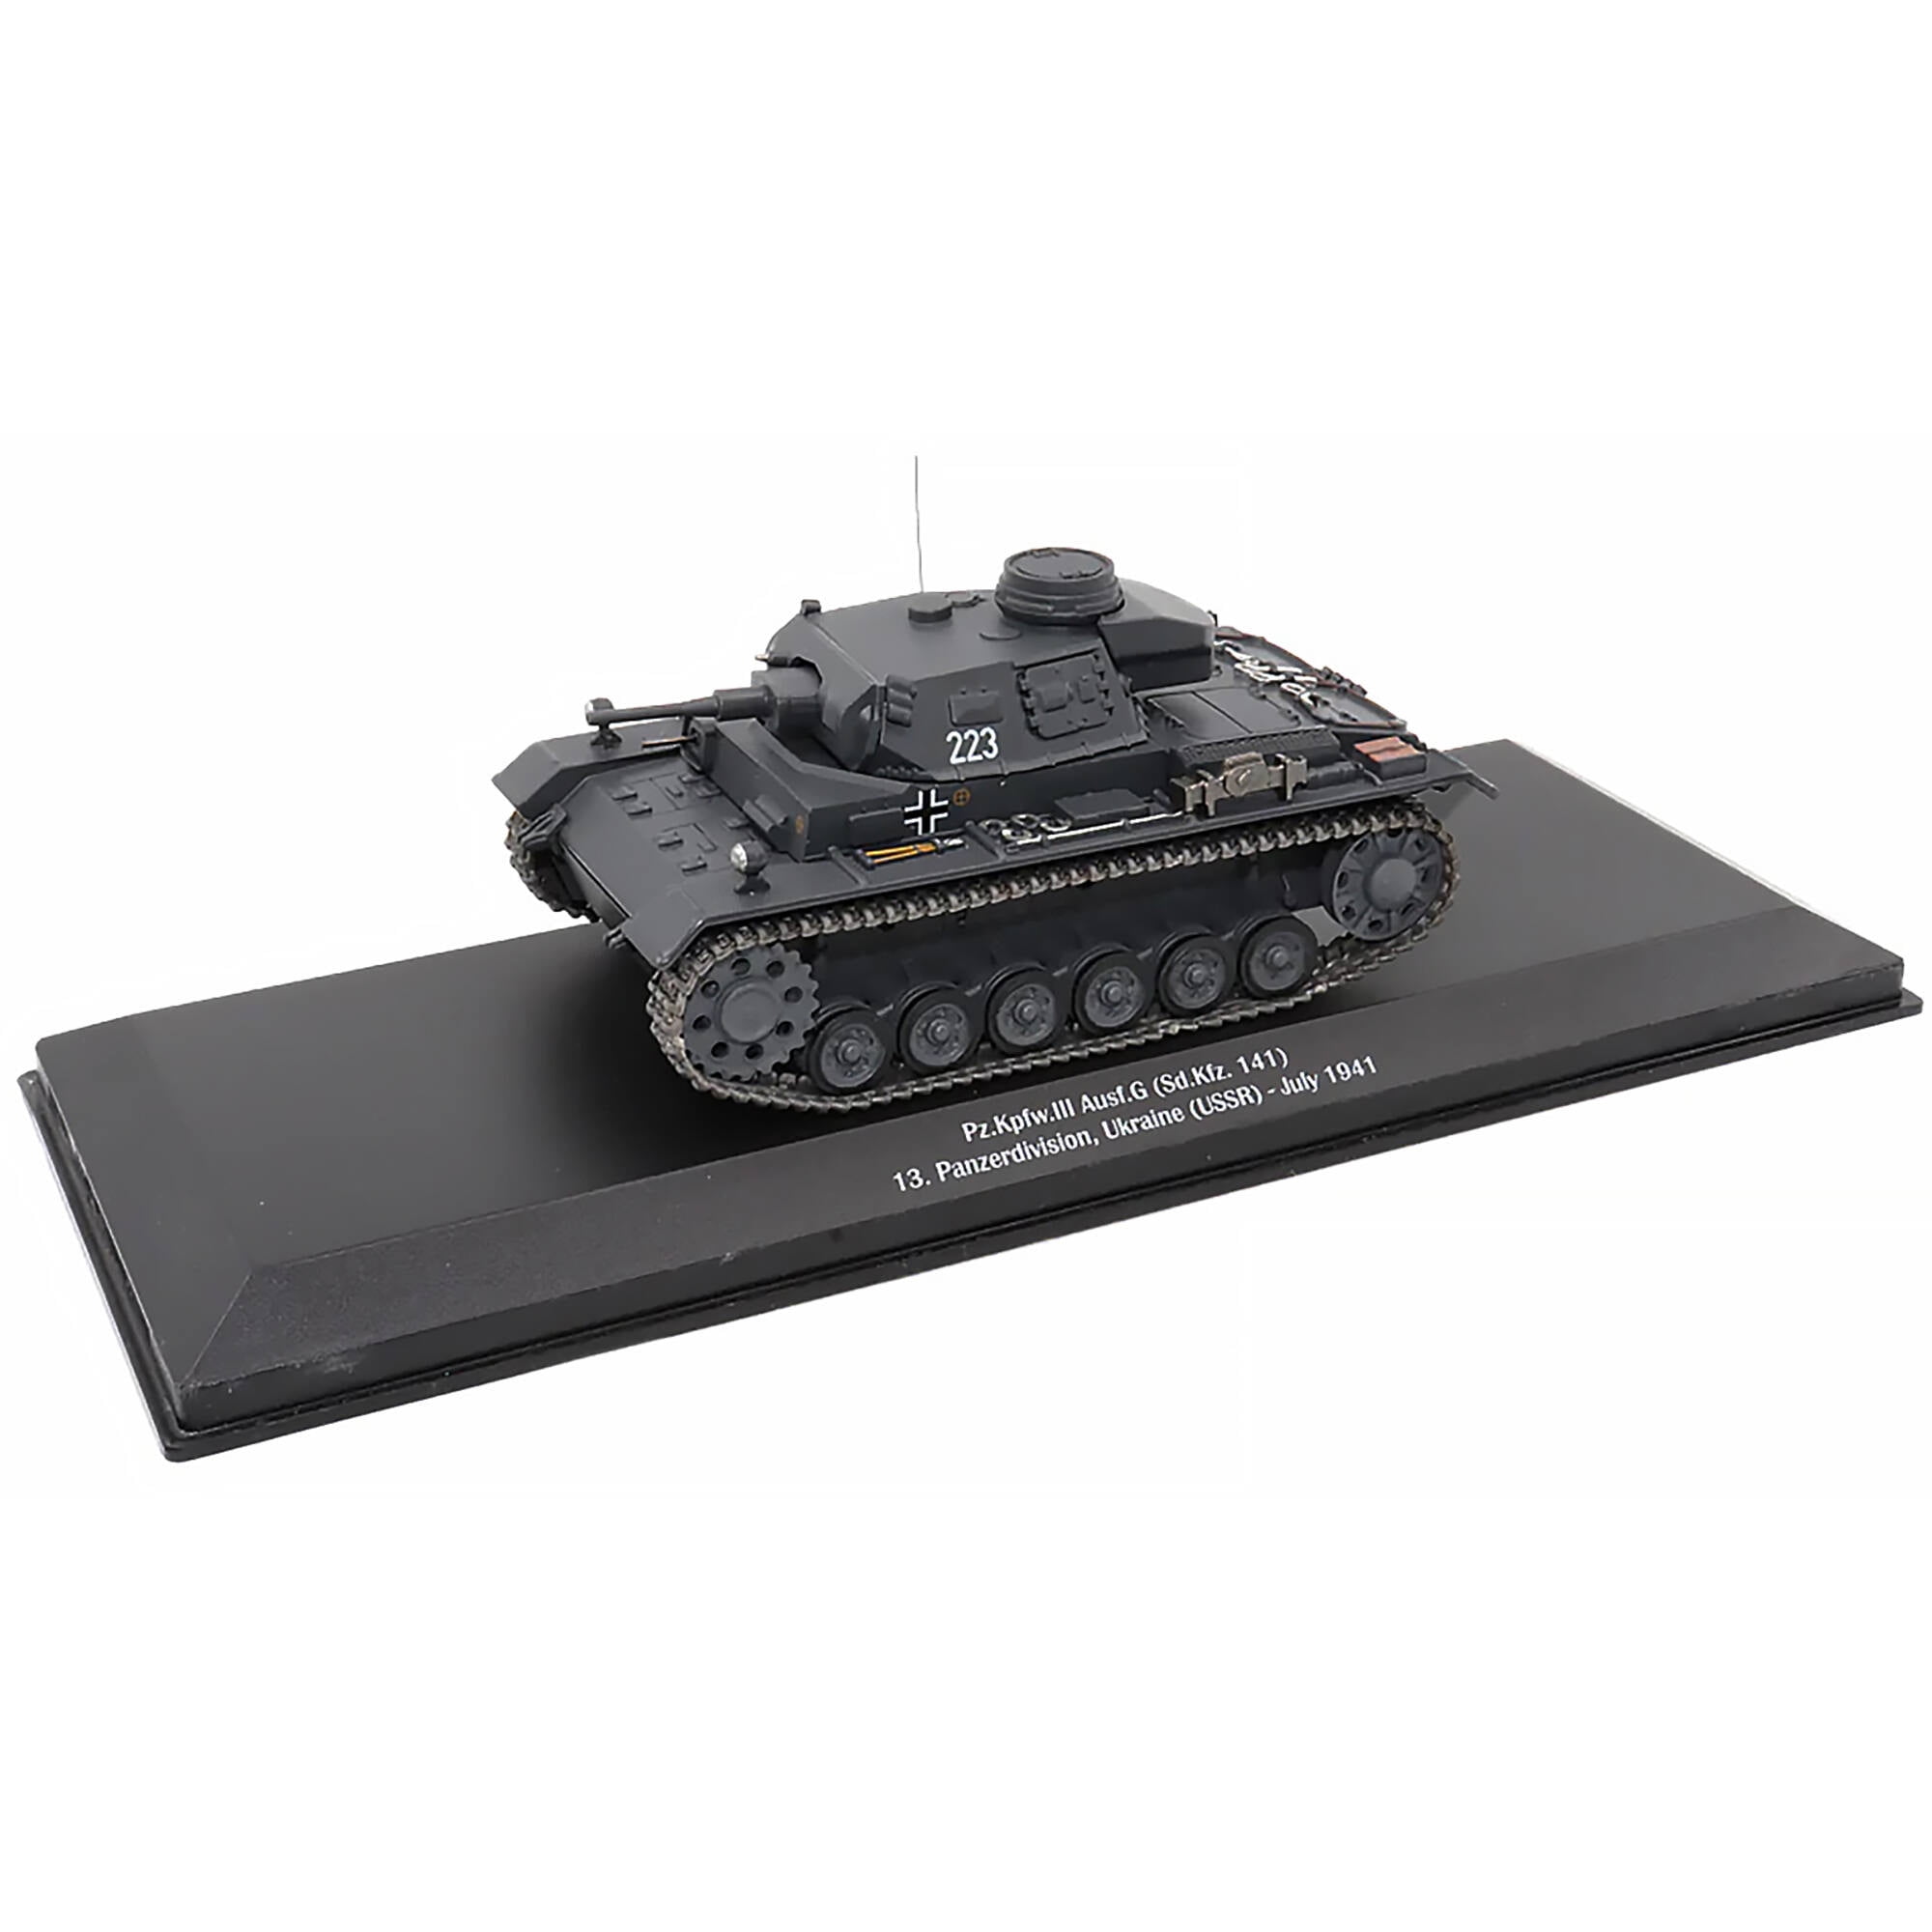 Picture of AFVs of WWII 23199-41 PZ.KPFW.III AUSF.G Tank No.223 Germany 13 Panzerdivision Ukraine July 1941 1 by 43 Scale Diecast Model Car